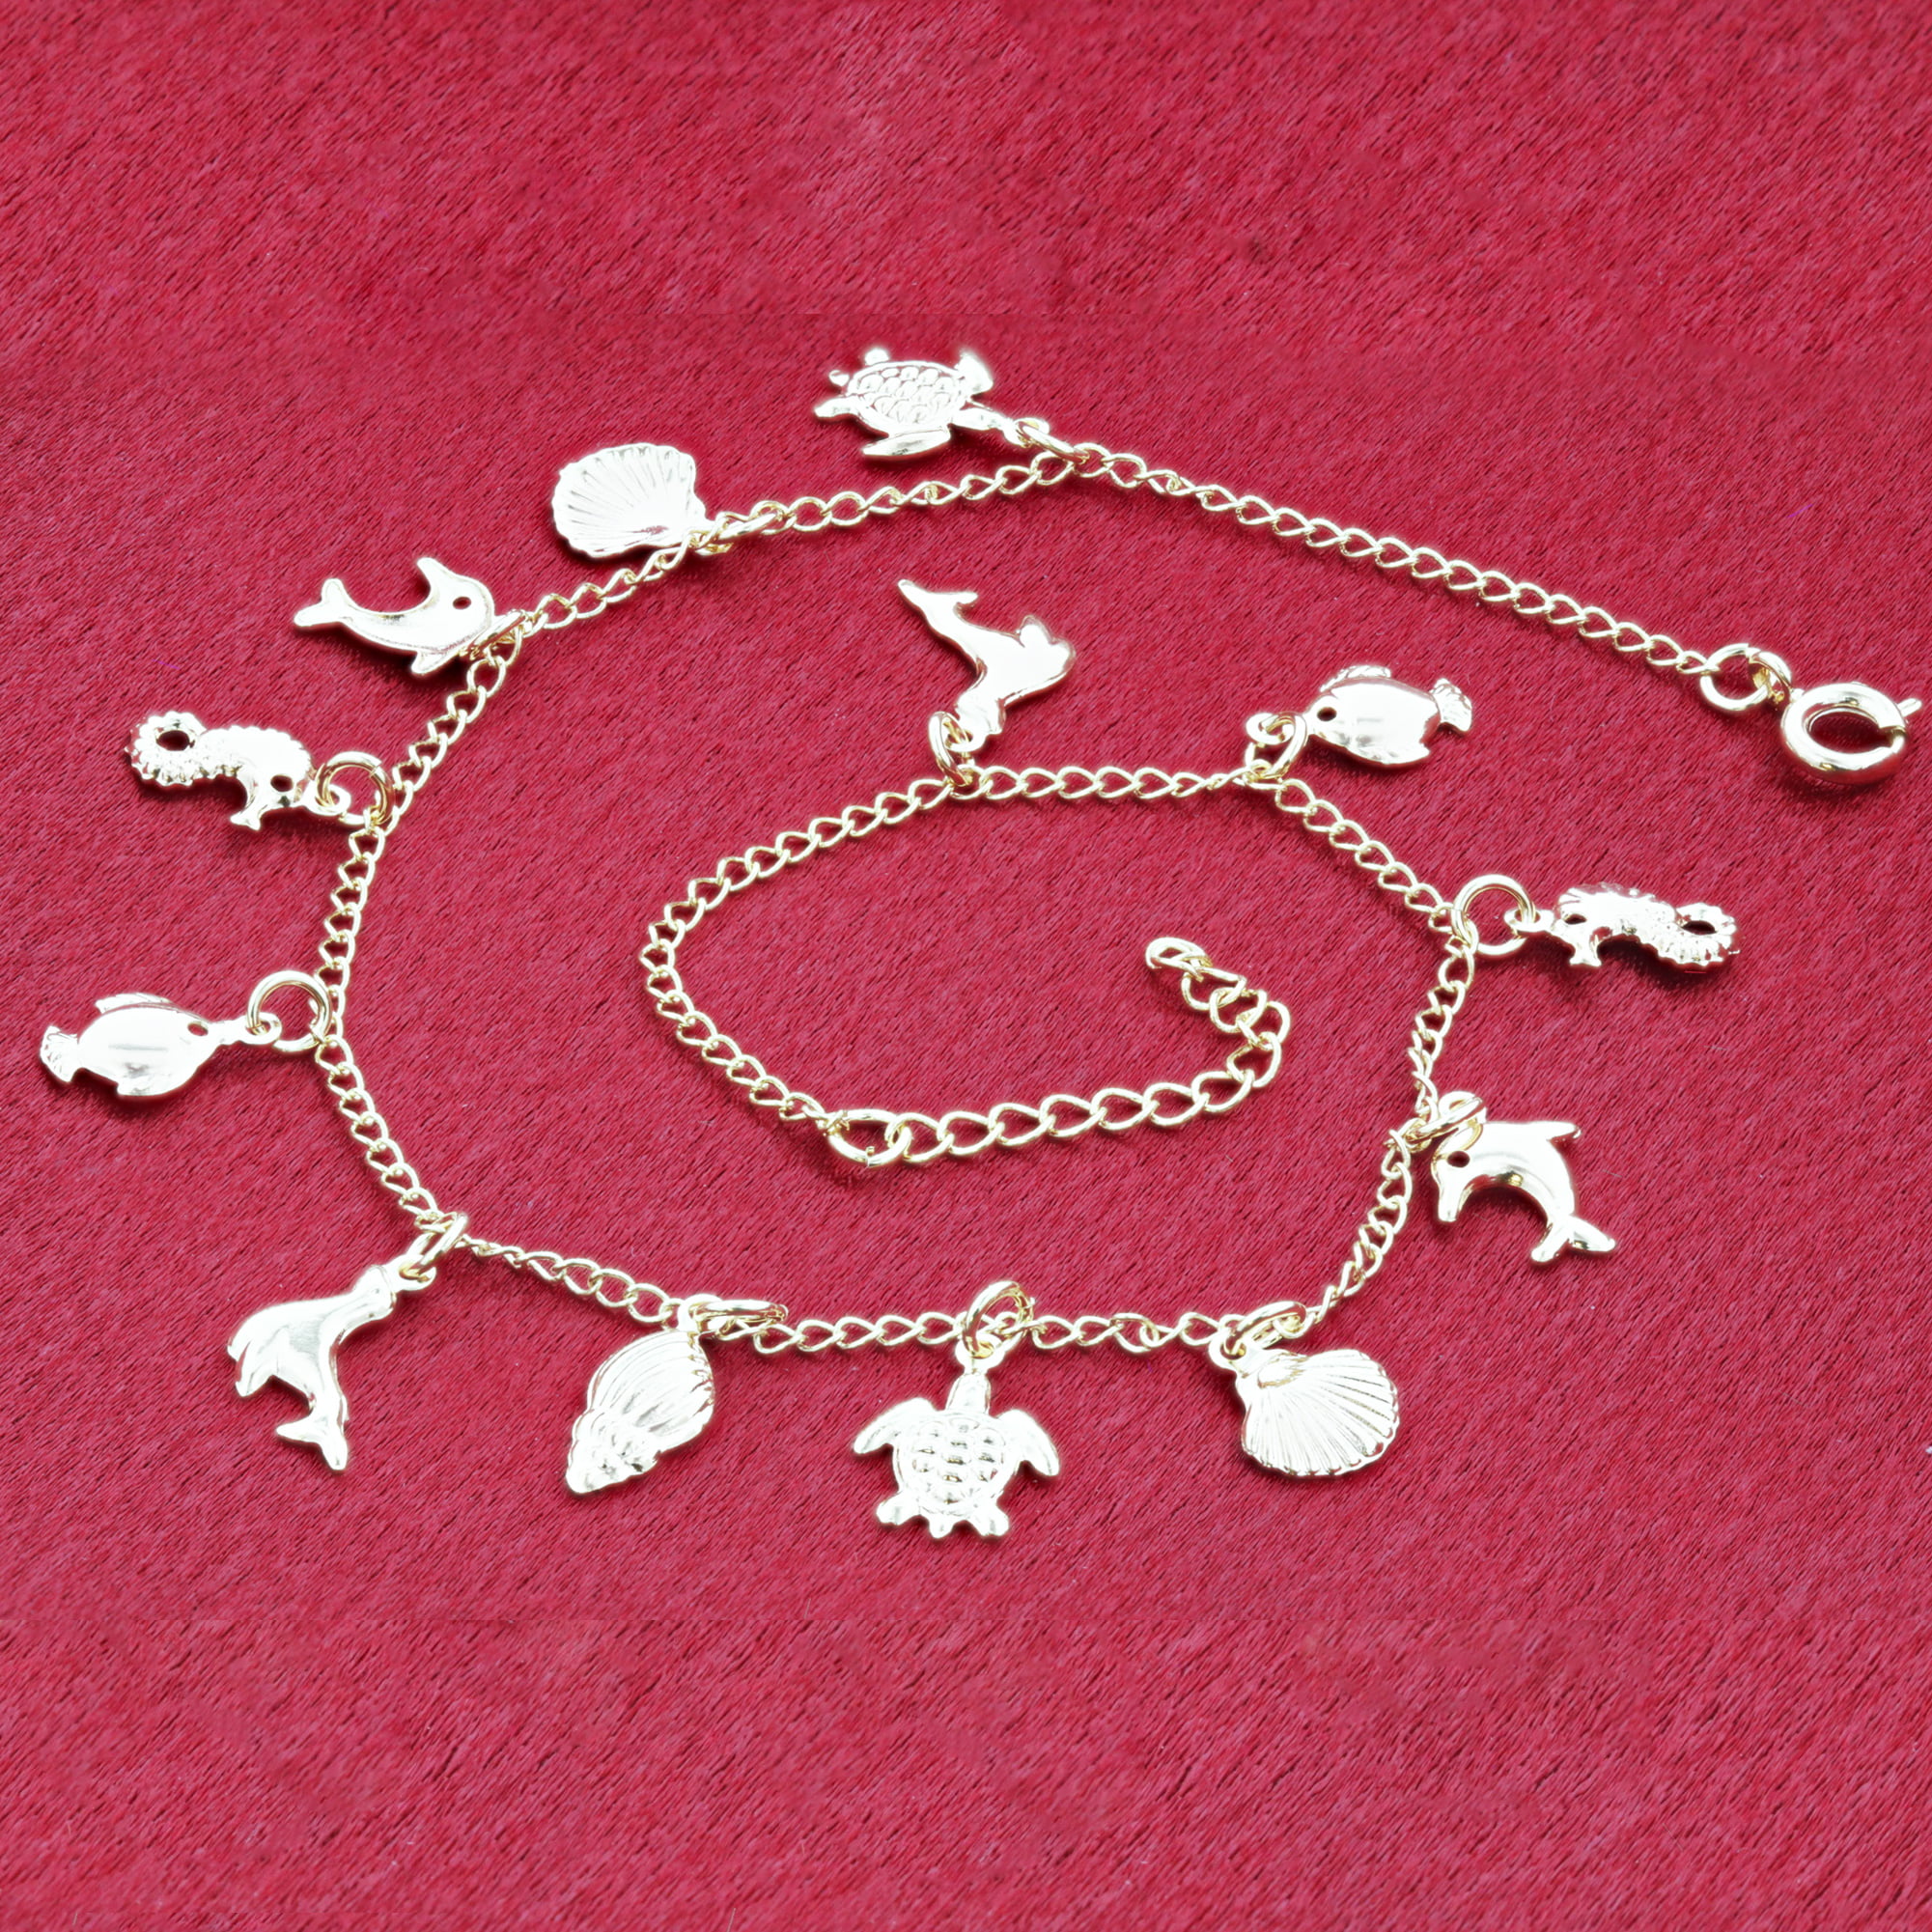 Sea Life Turtle Shell Dolphin Fish Sea Horse 10 to 11 Inch Adjustable Foot Chain 18k Gold Overlay Anklet Ankle Bracelets 